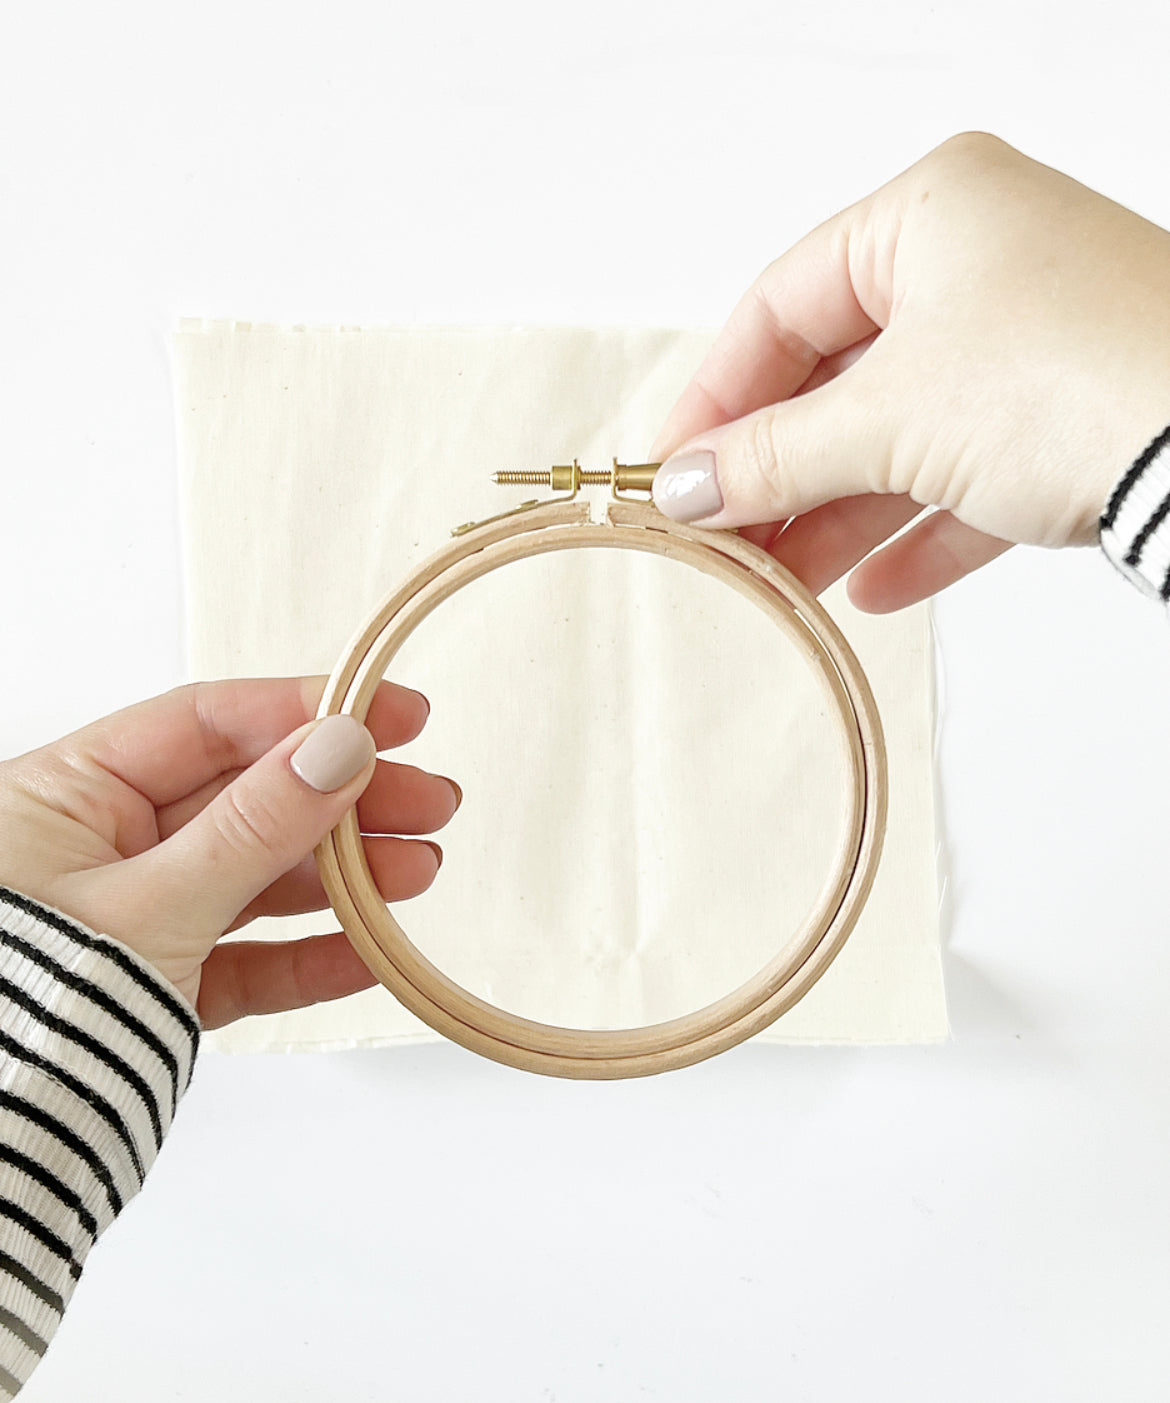 How to set up fabric in an embroidery hoop– Mindful Mantra Embroidery